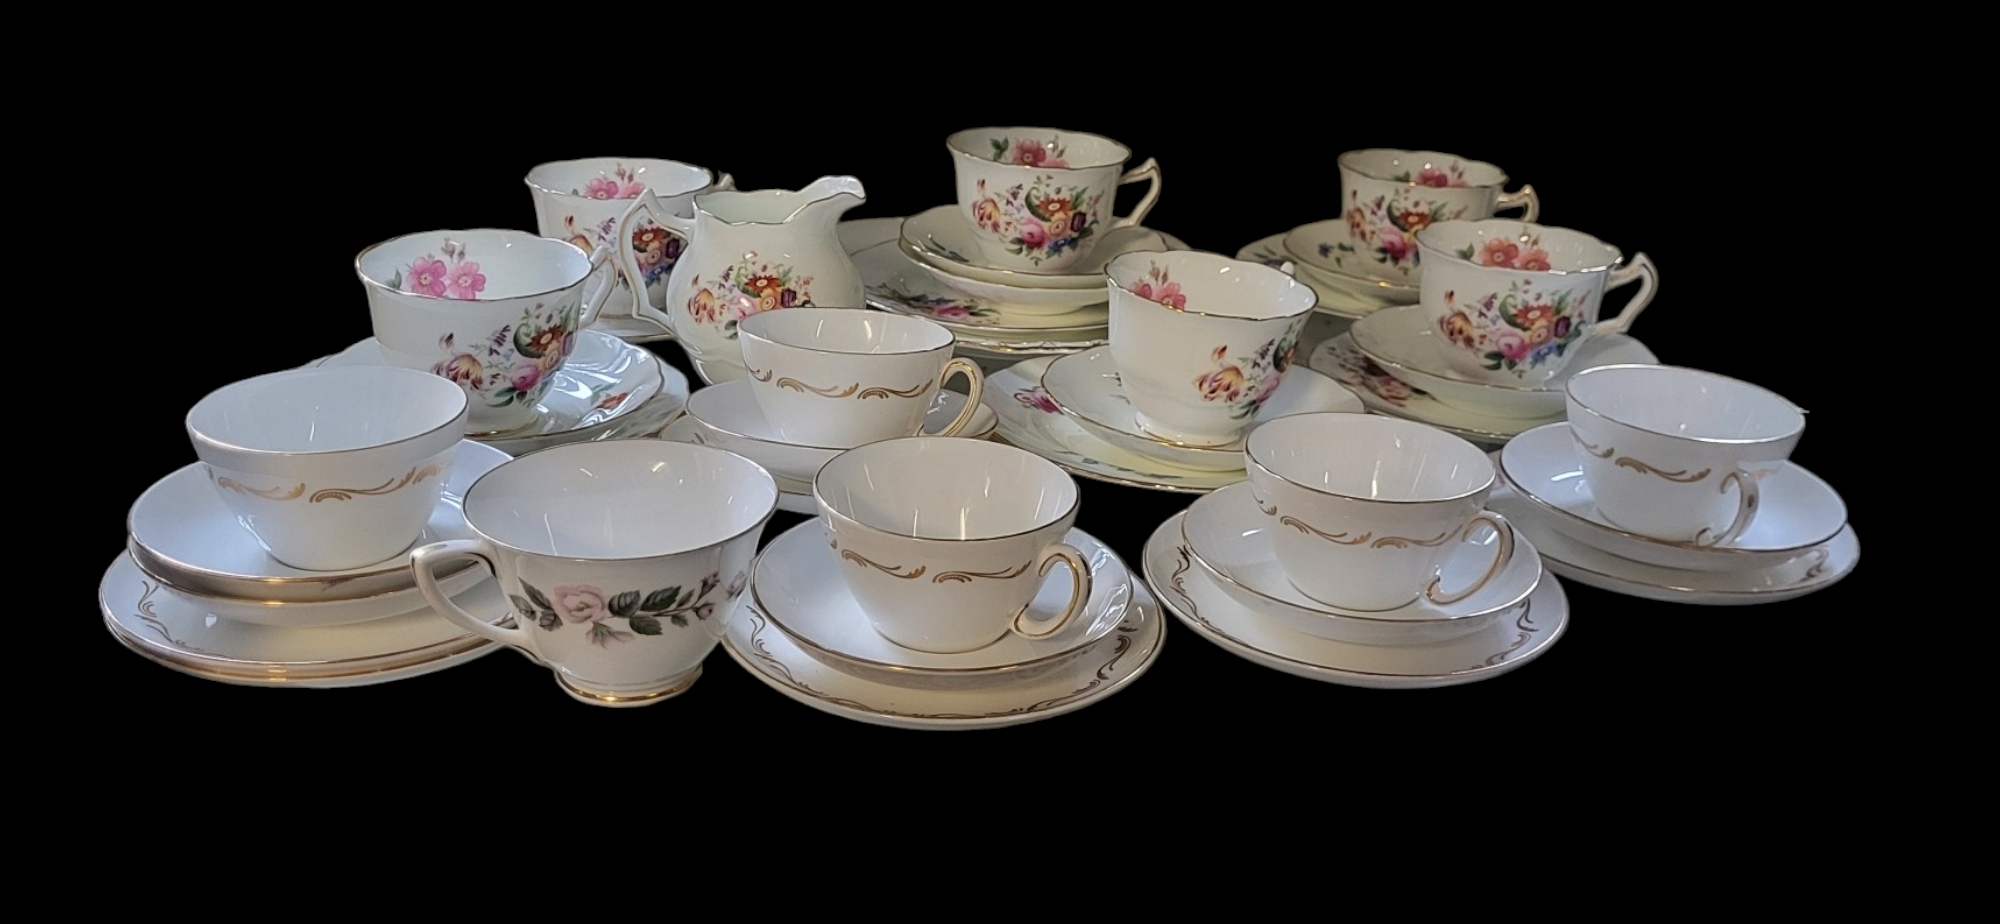 A MID 20TH CENTURY COALPORT BONE CHINA TEA SERVICE FOR SIX In floral design, Junetime pattern, along